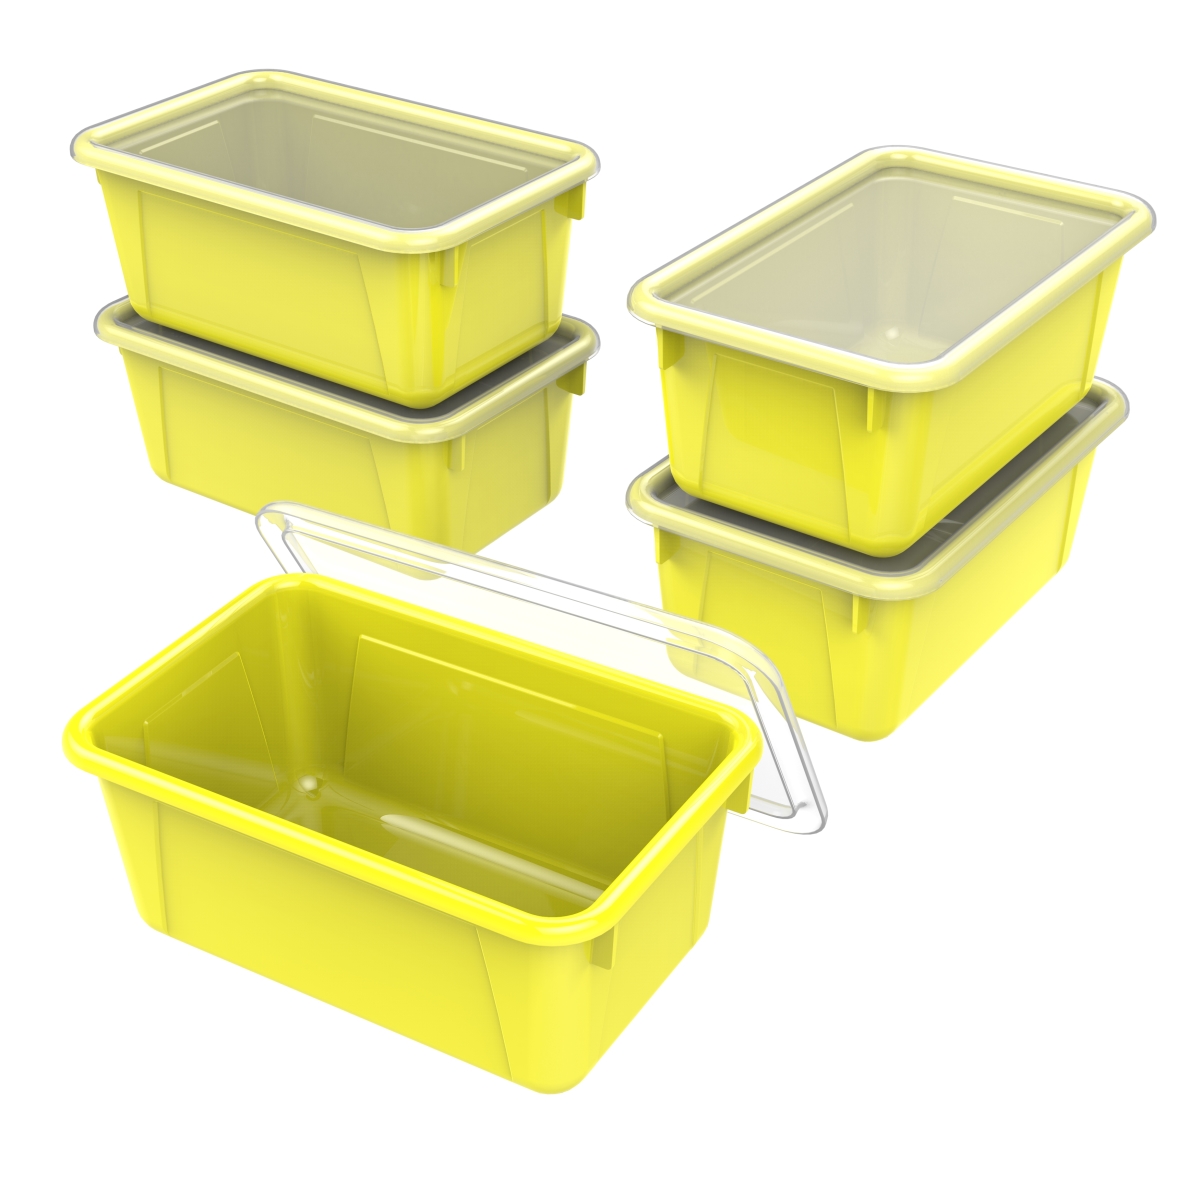 Classroom Small Cubby Bin With Cover, Yellow - Pack Of 5